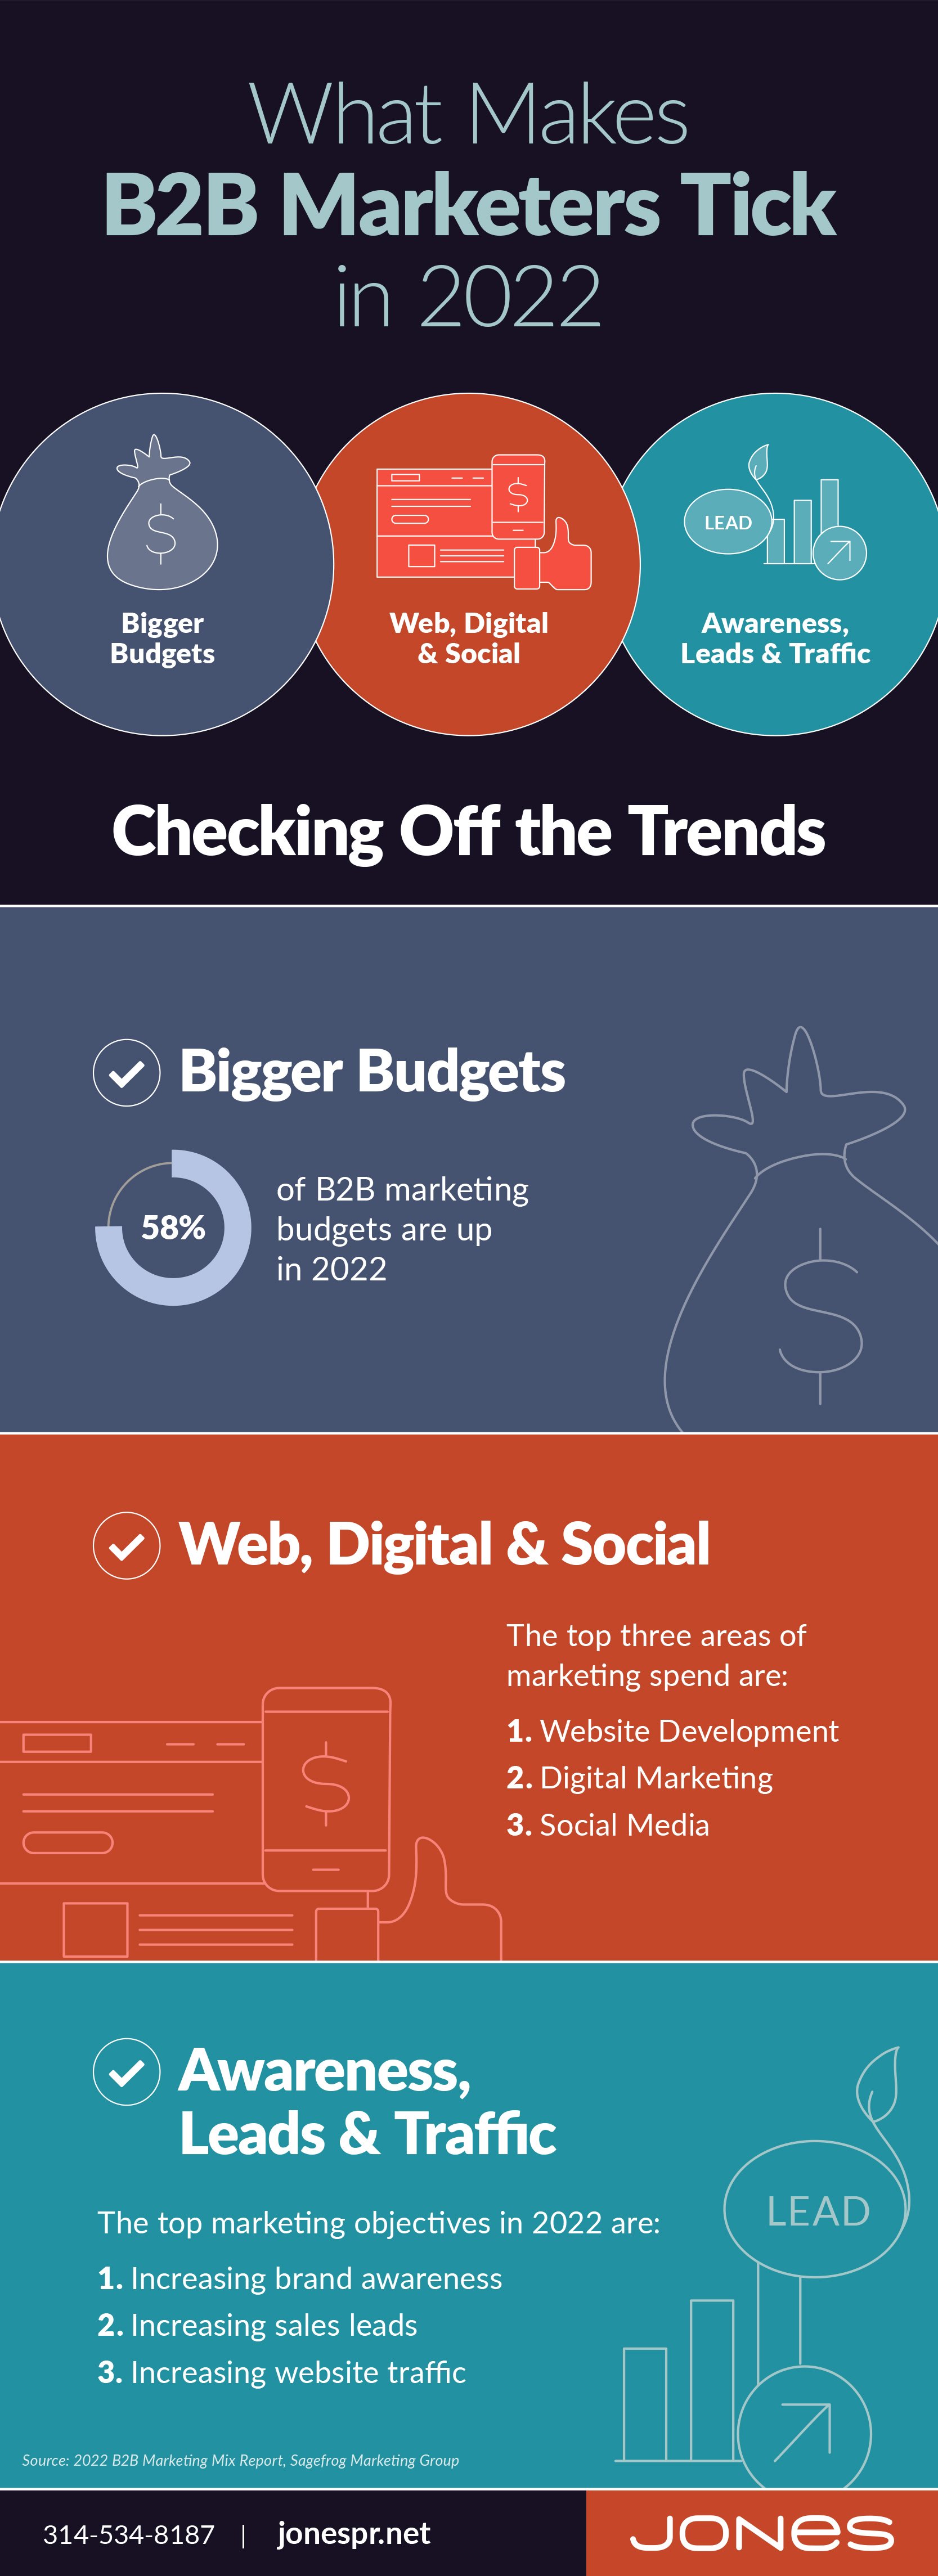 What Makes B2B Marketers Tick in 2022 (infographic)